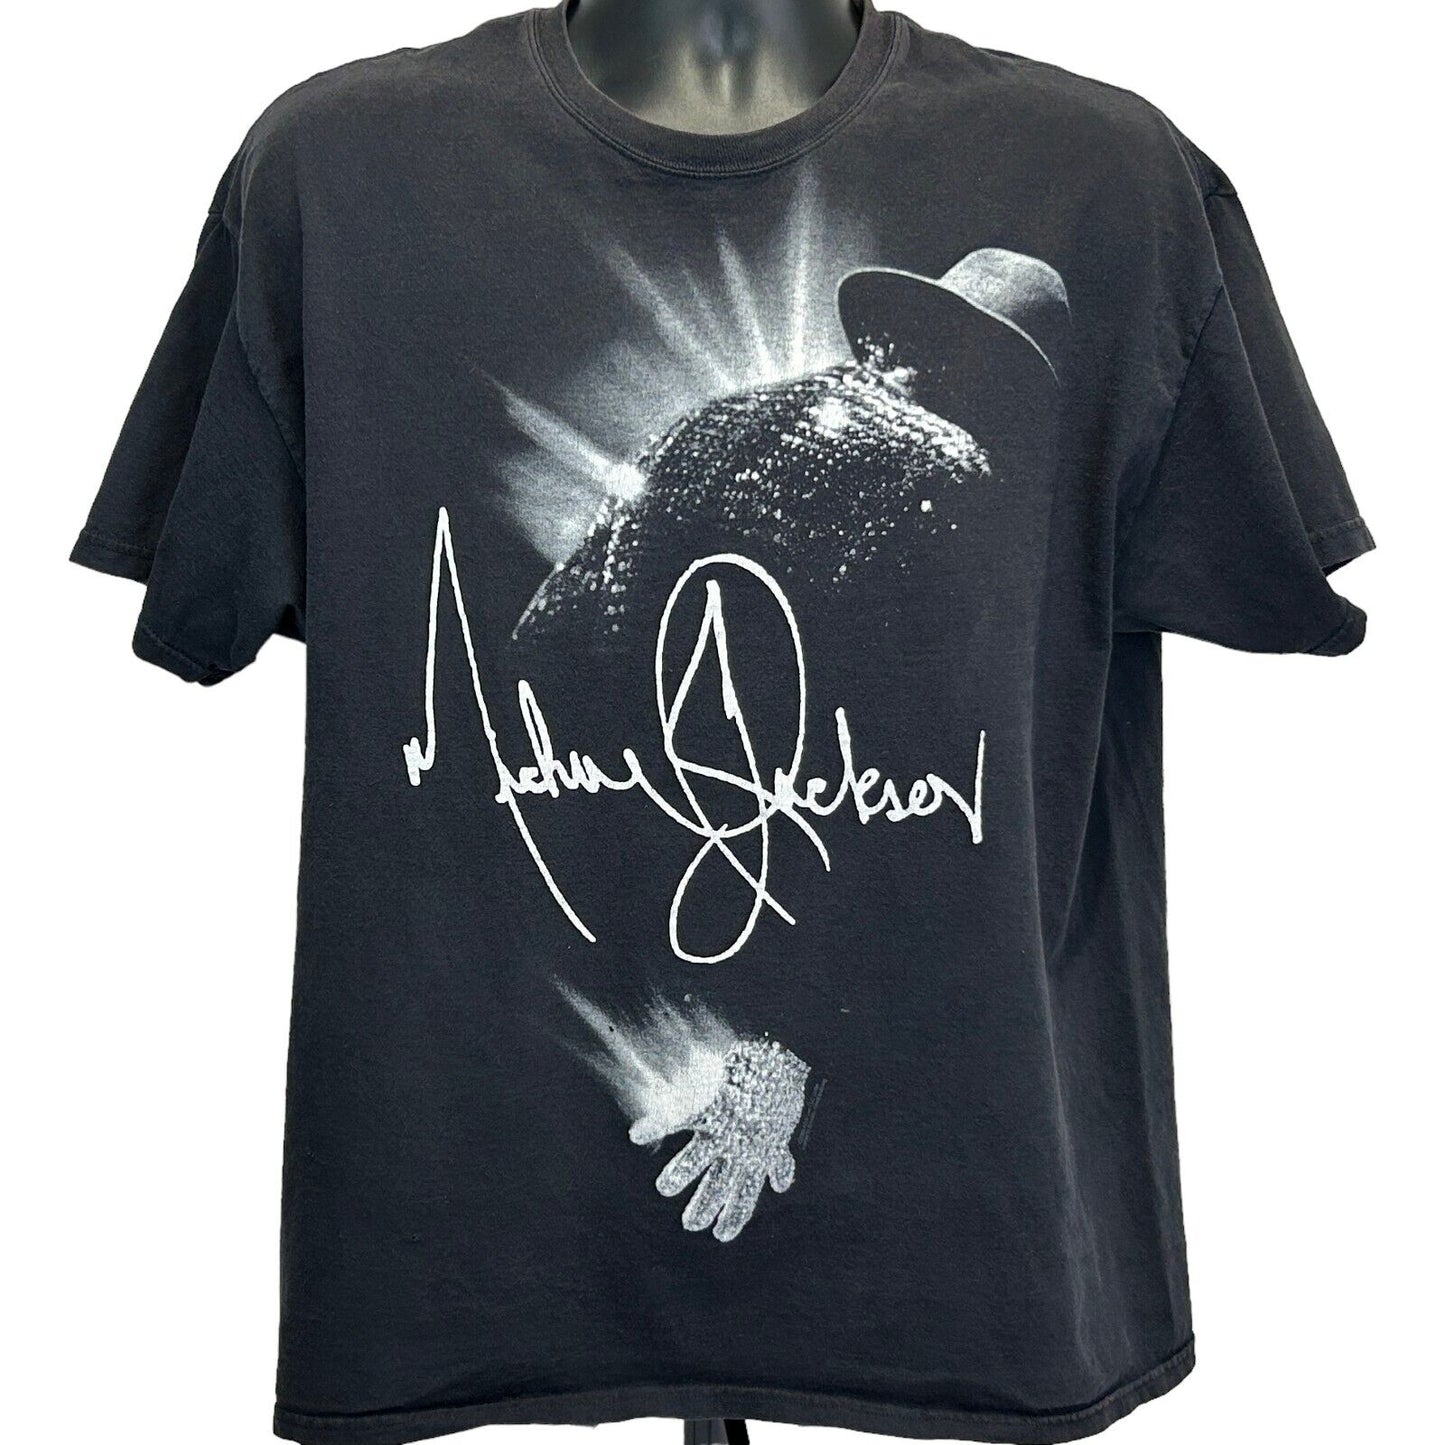 Michael Jackson T Shirt King of Pop 2009 Officially Licensed Black Tee XL